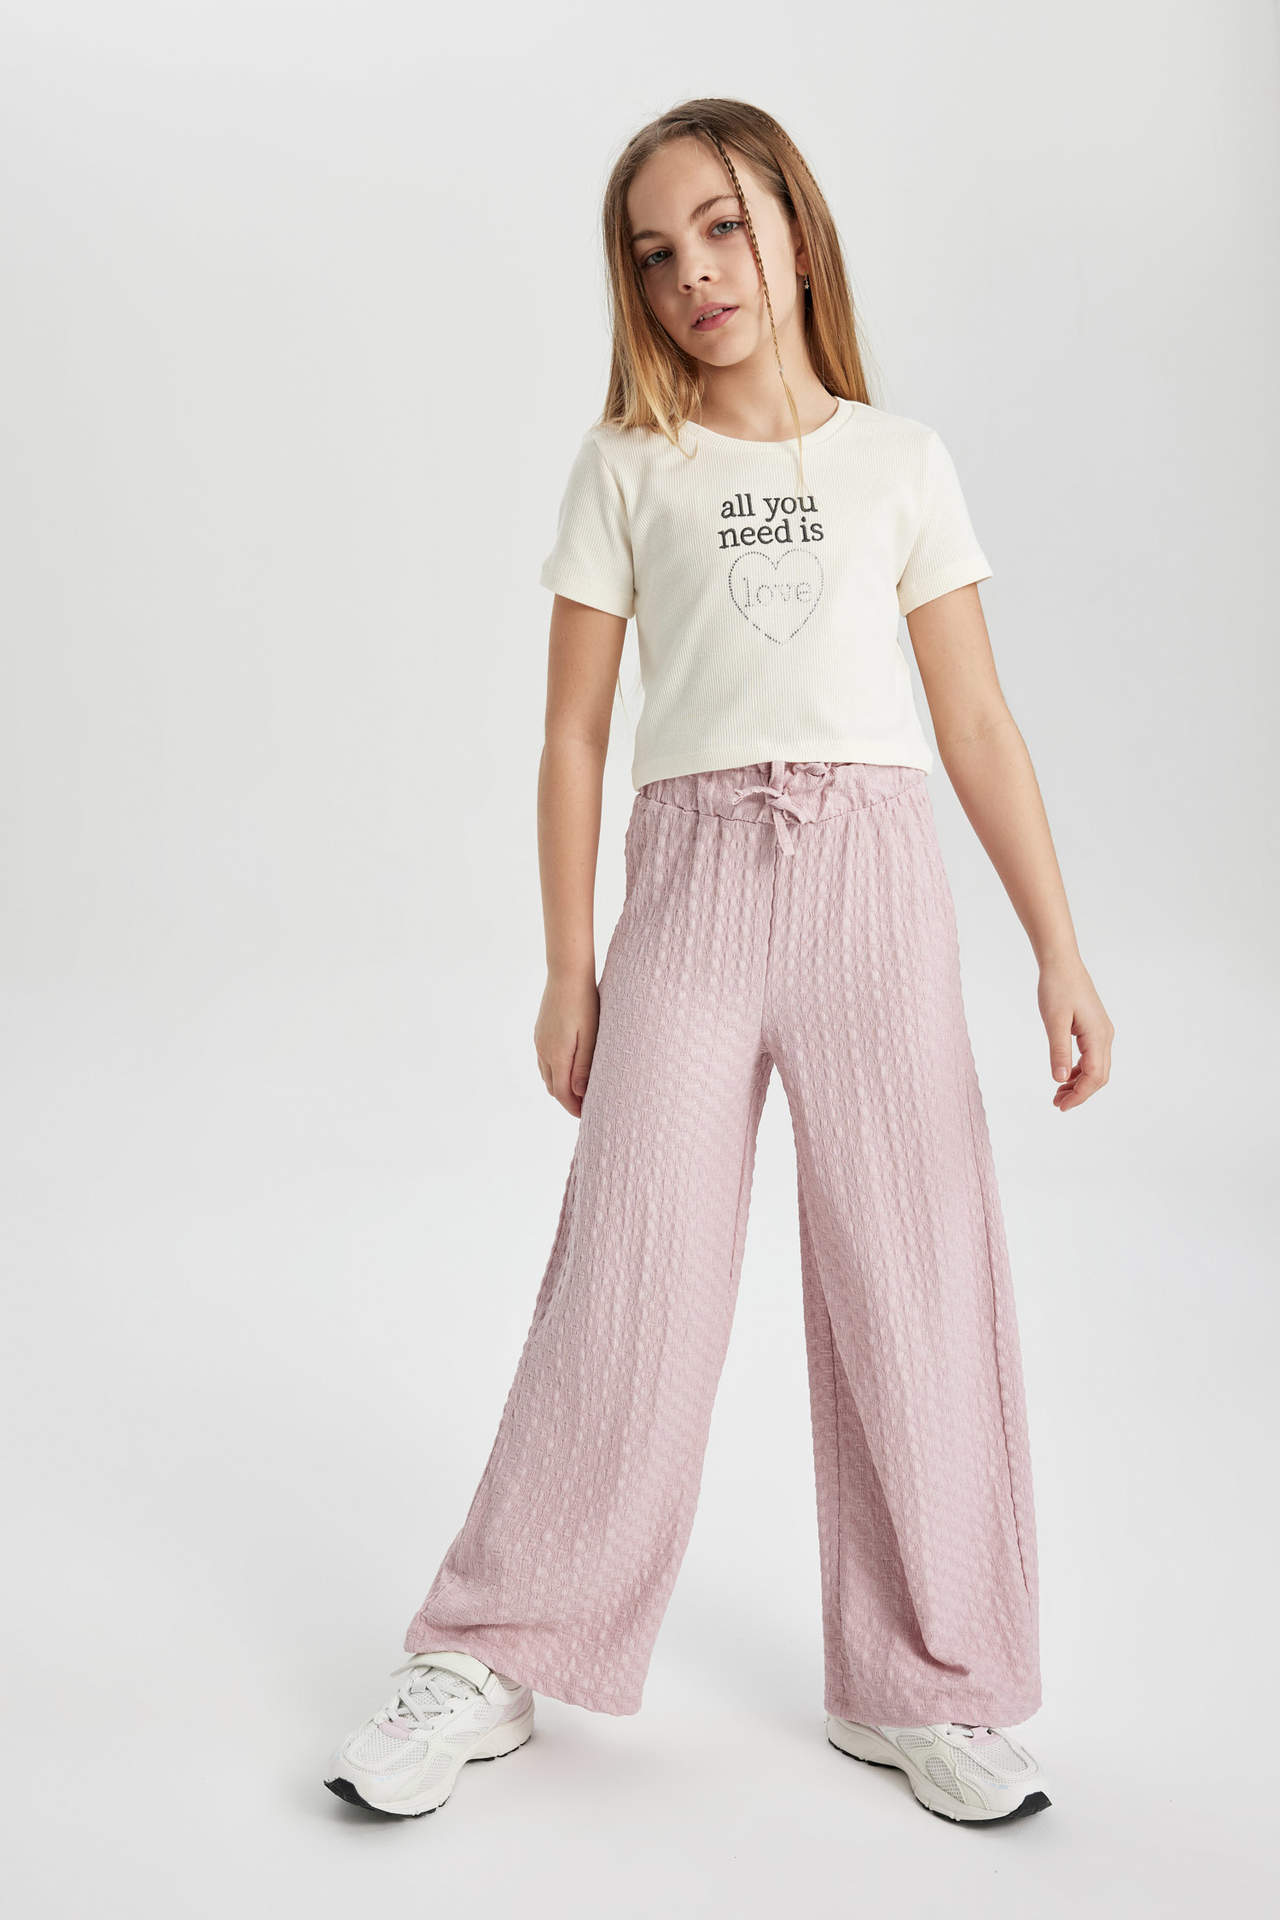 DEFACTO Girl Printed T-Shirt Trousers 2 Piece Set